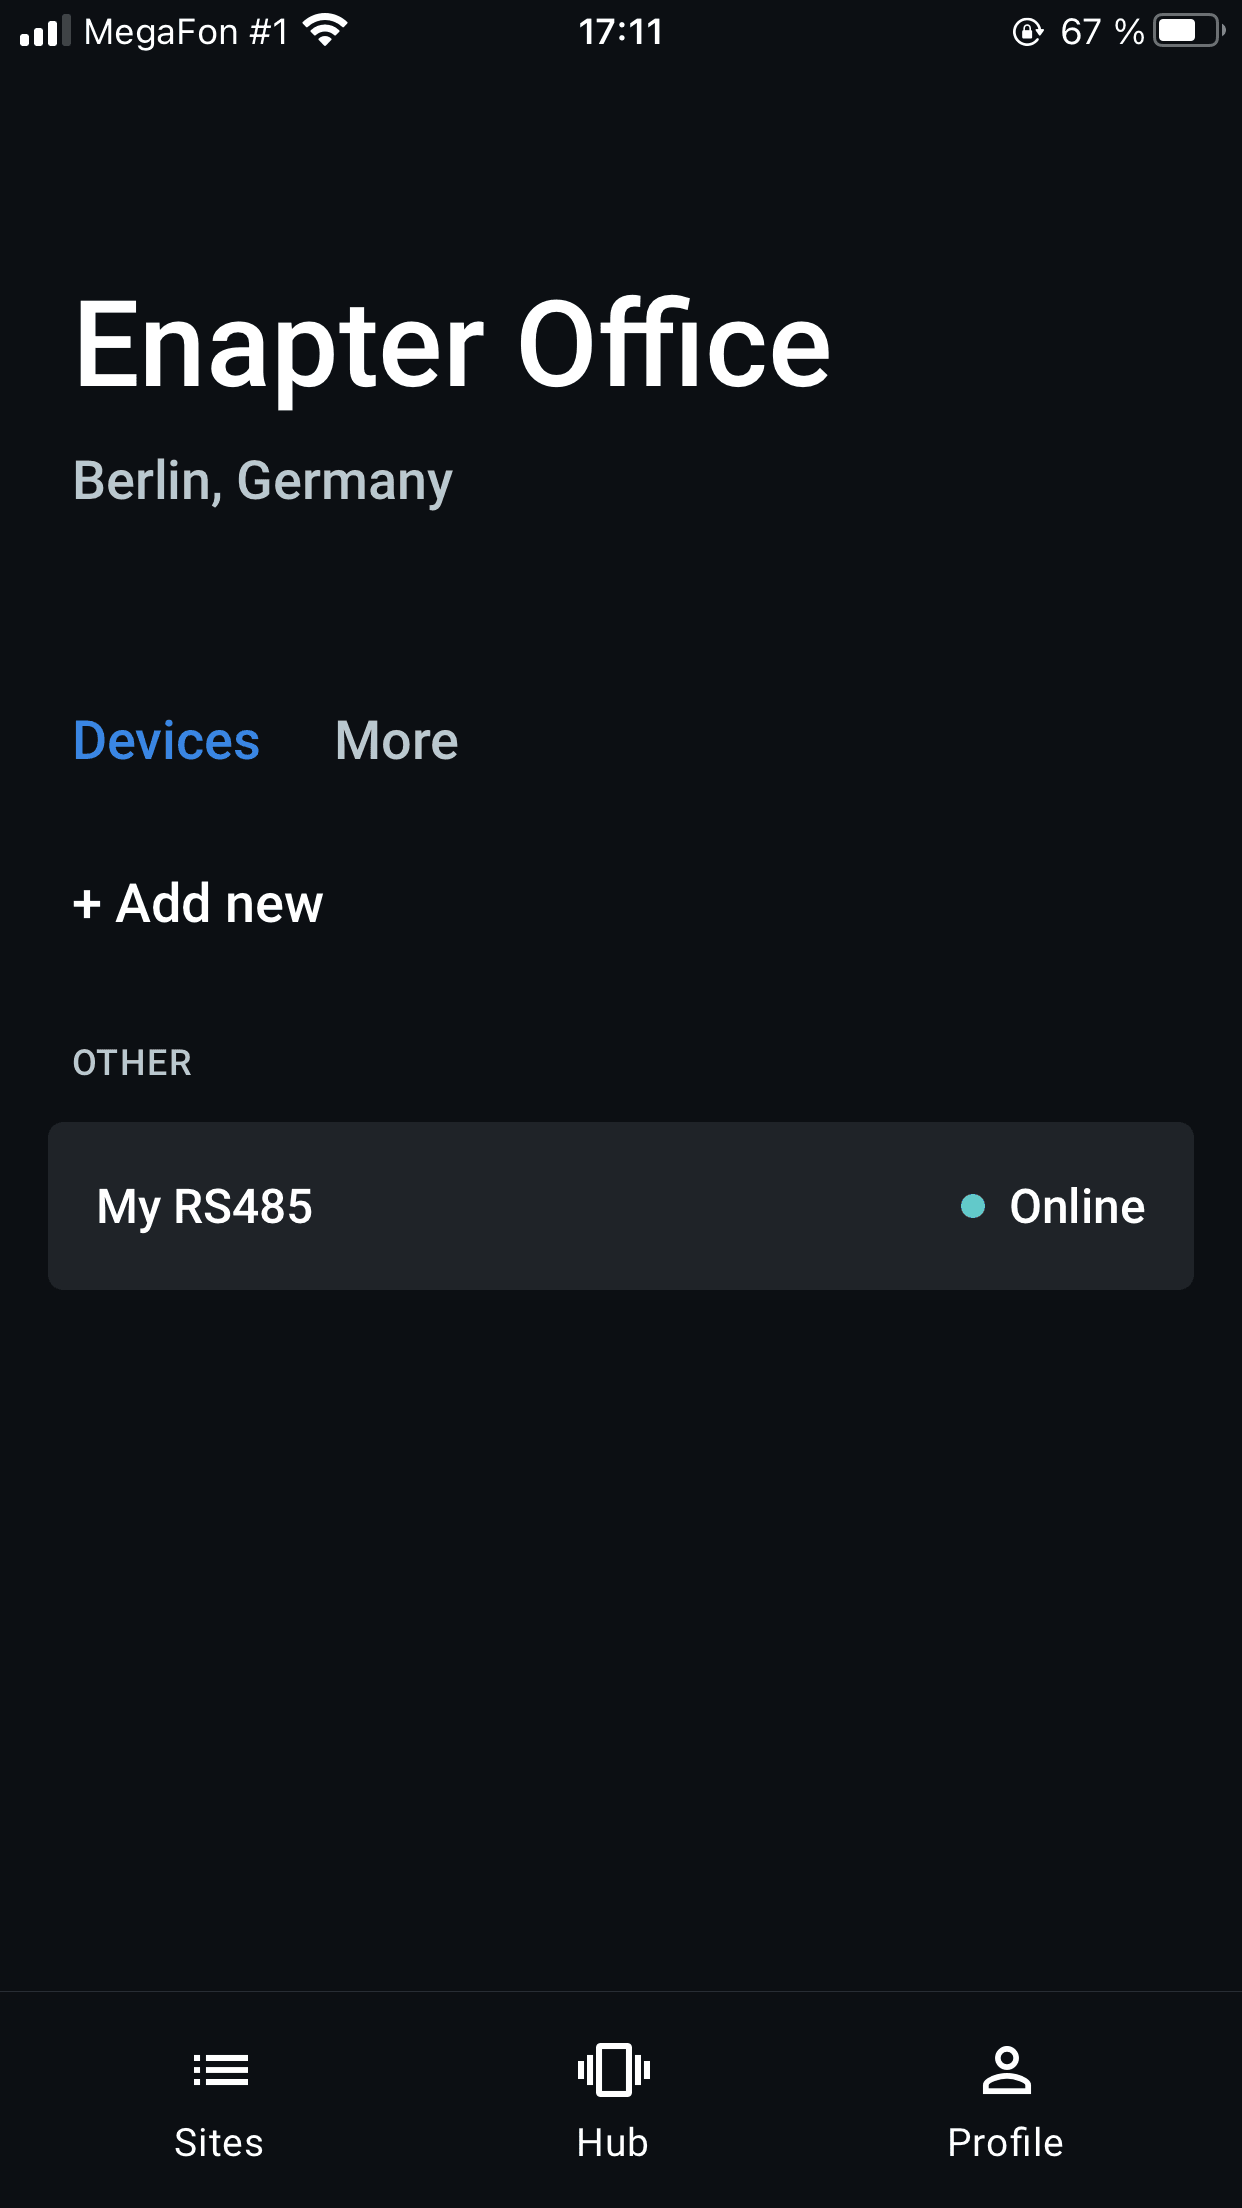 Site screen lists all devices you have